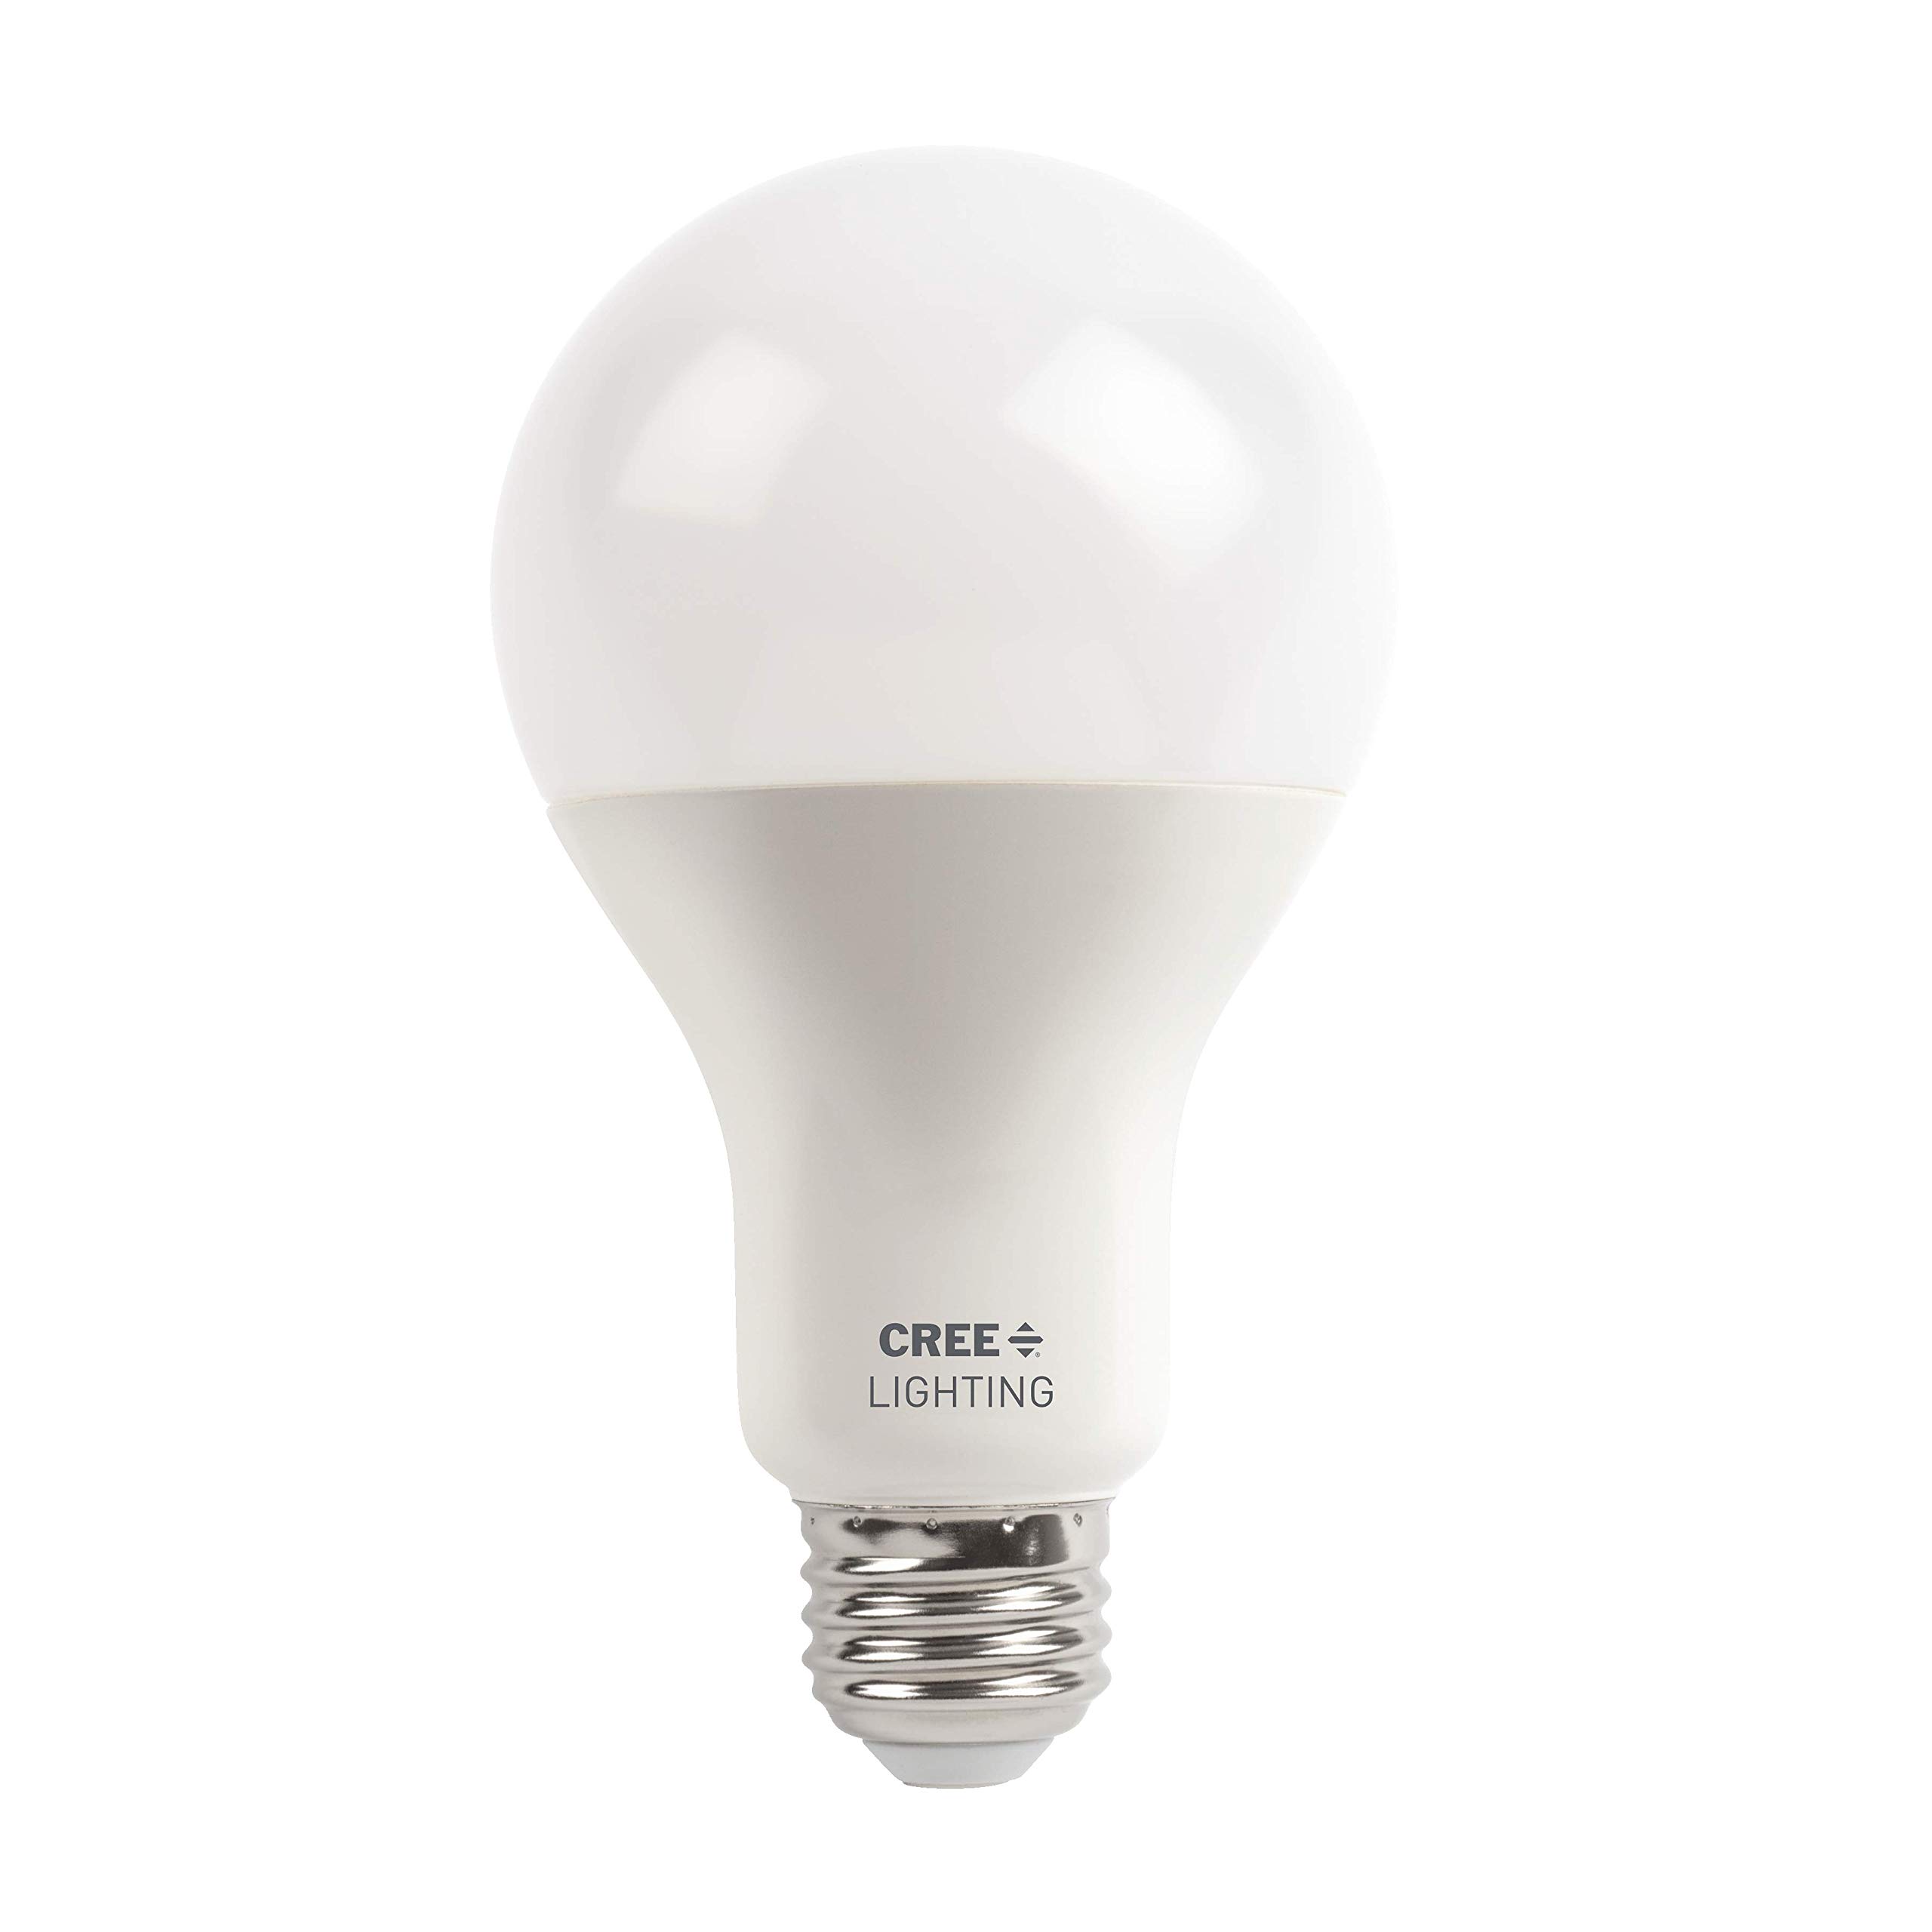 Cree Lighting Connected Max Smart Led Bulb A21 100W Tunable White + Color Changing, 2.4 Ghz, Works With Alexa And Google Home, No Hub Required, Bluetooth + Wifi, 1Pk